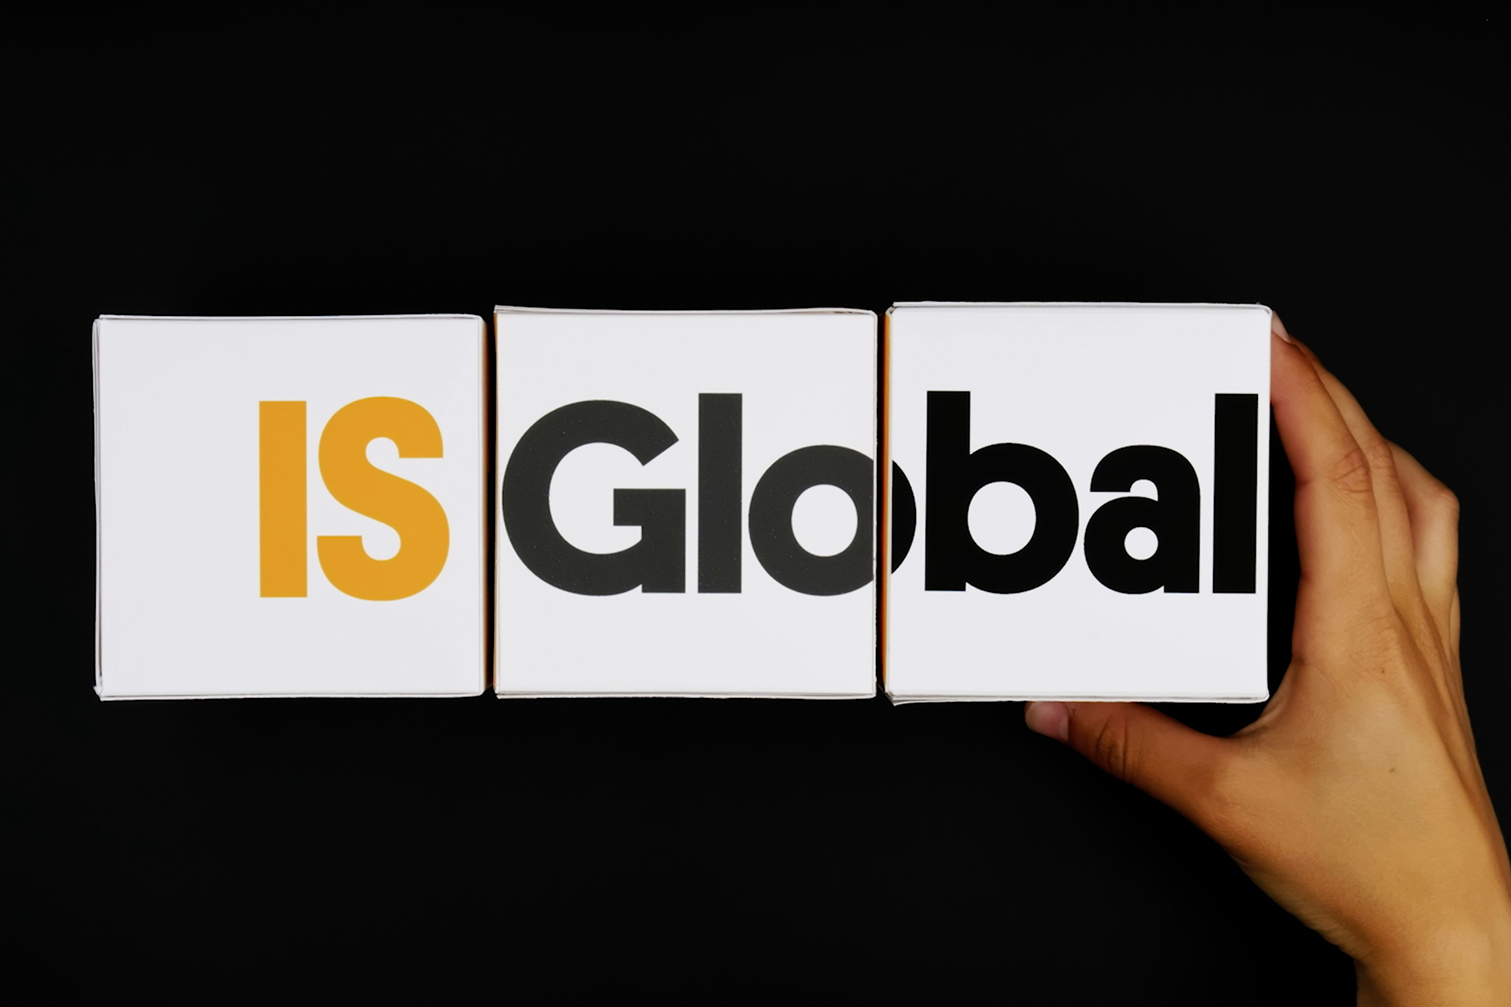 ISGlobal 1